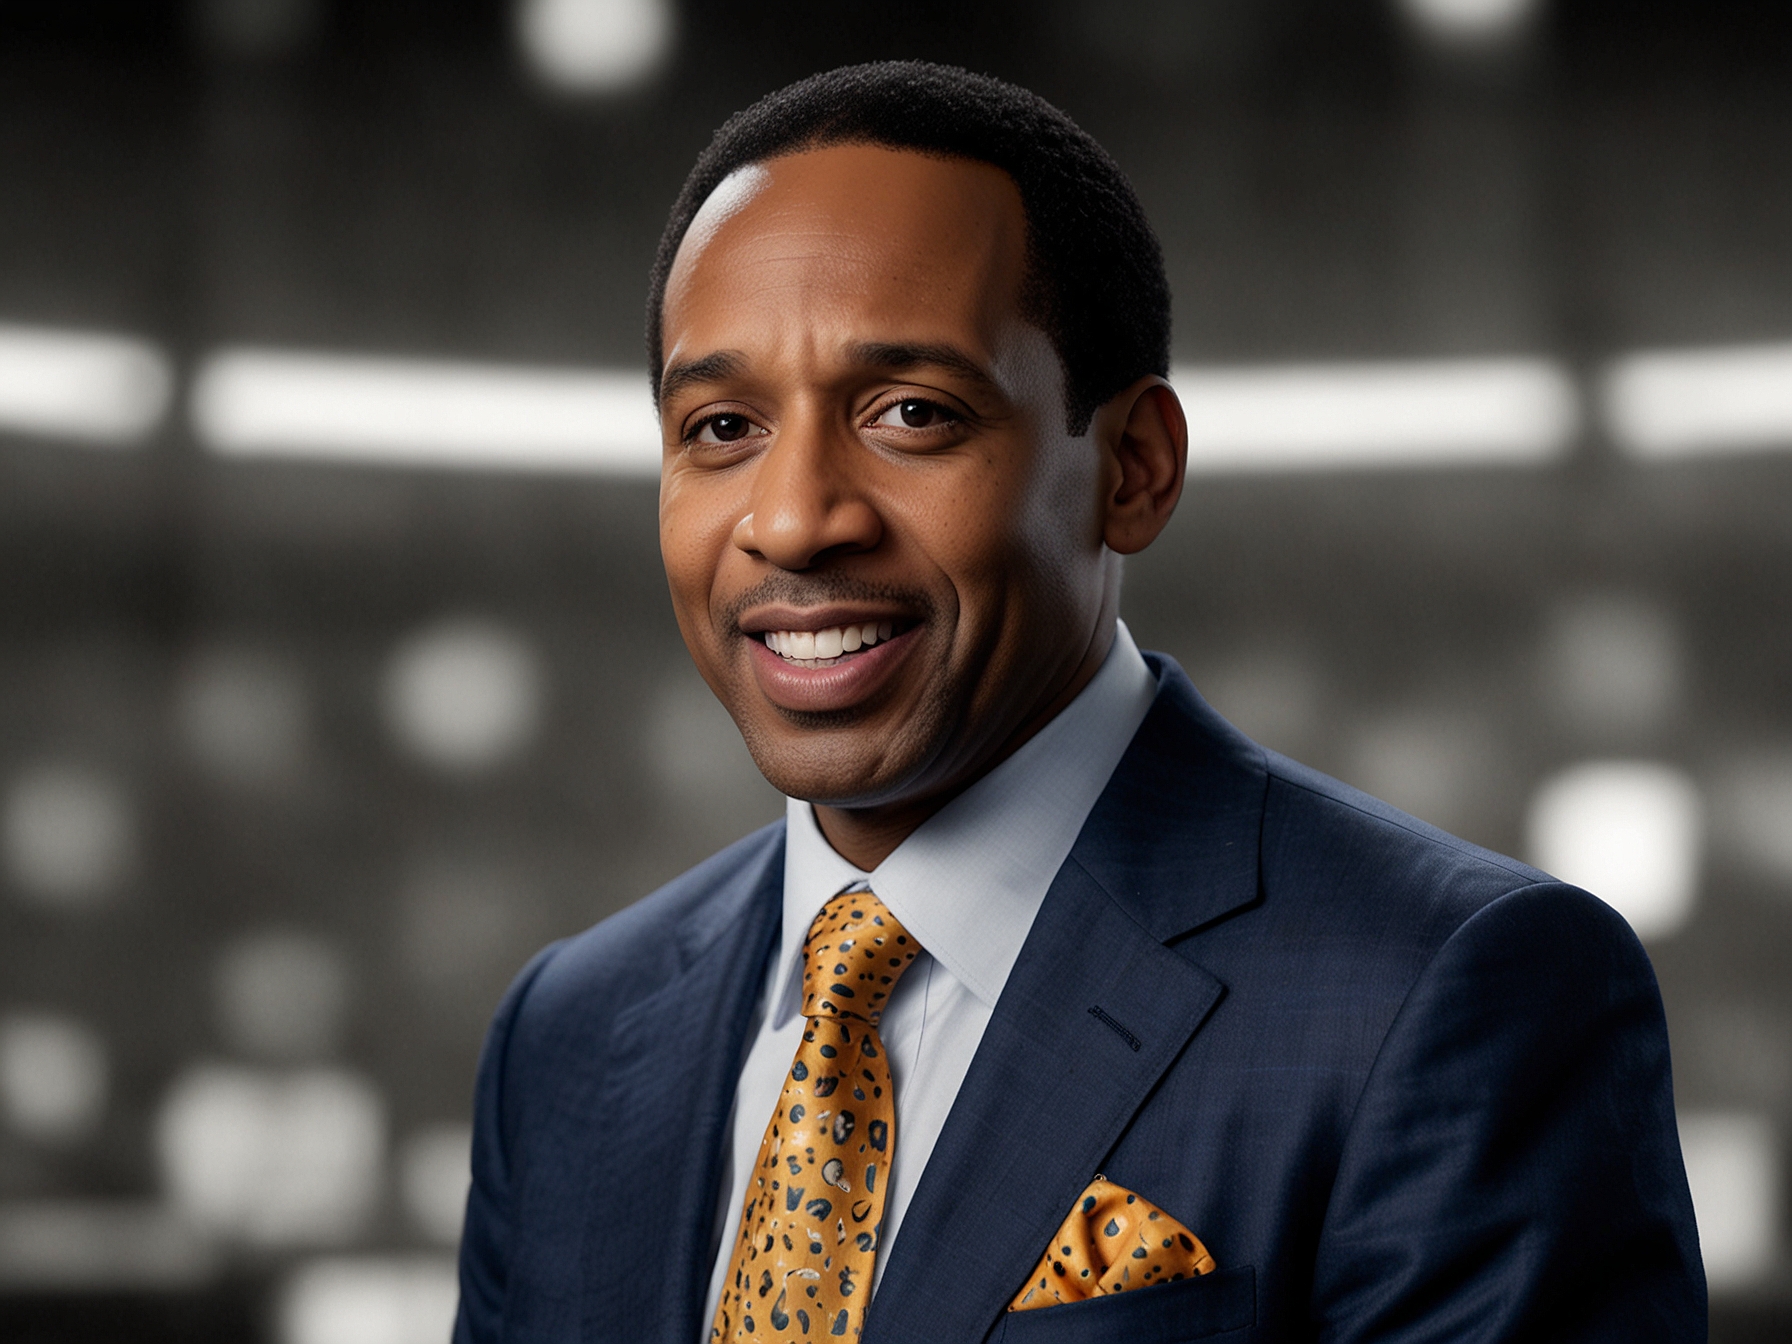 Stephen A. Smith passionately discussing sports on ESPN's 'First Take', highlighting his energetic style and bold opinions, which have both captivated and divided fans.